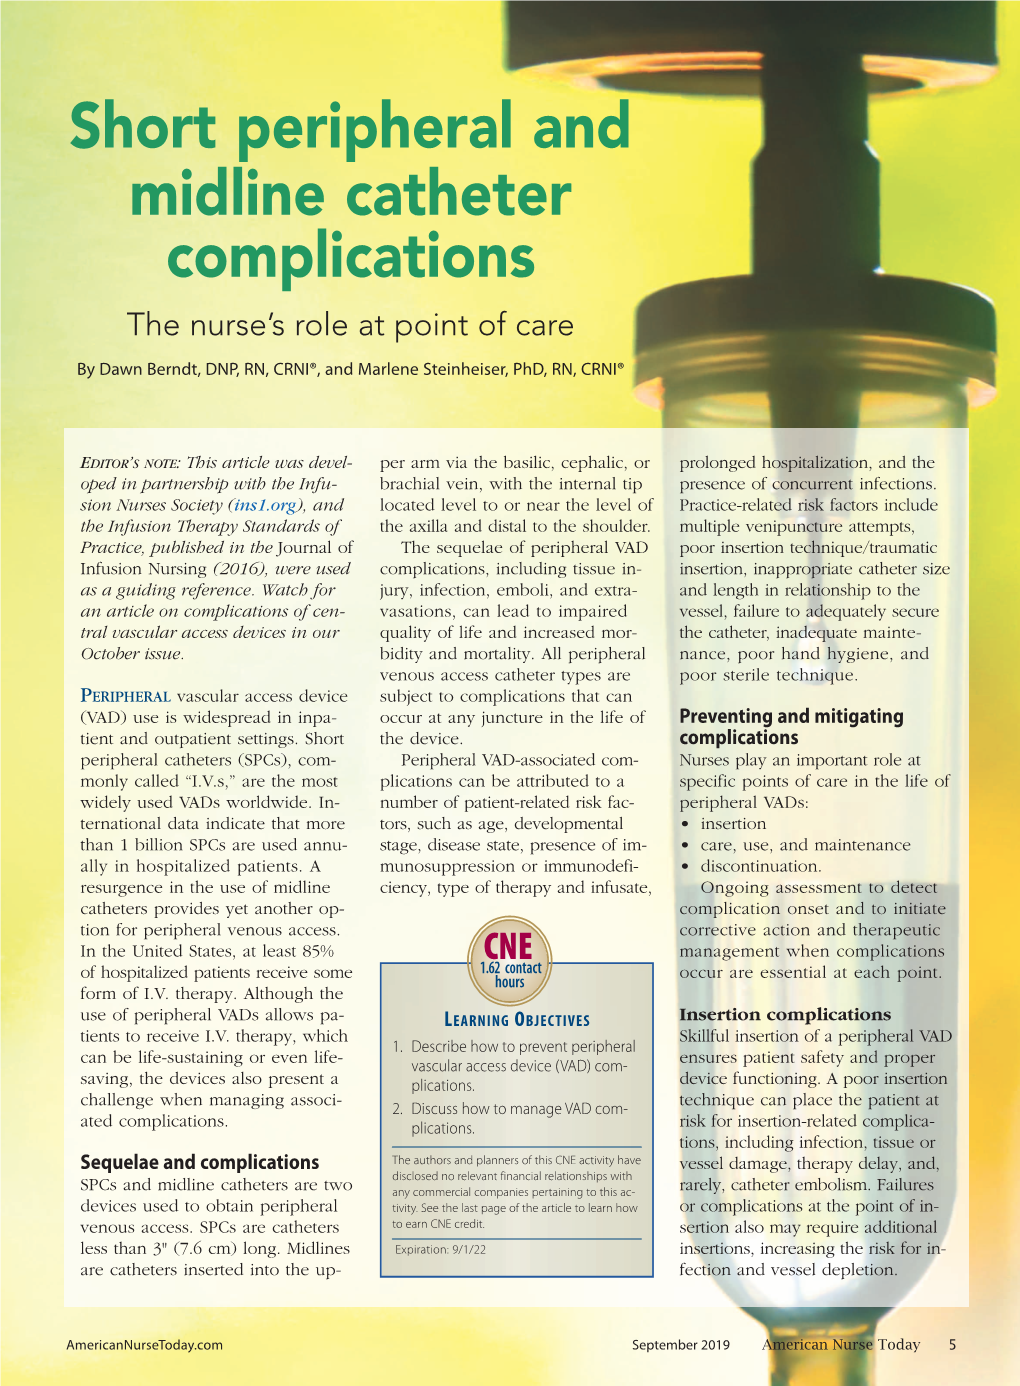 Short Peripheral and Midline Catheter Complications